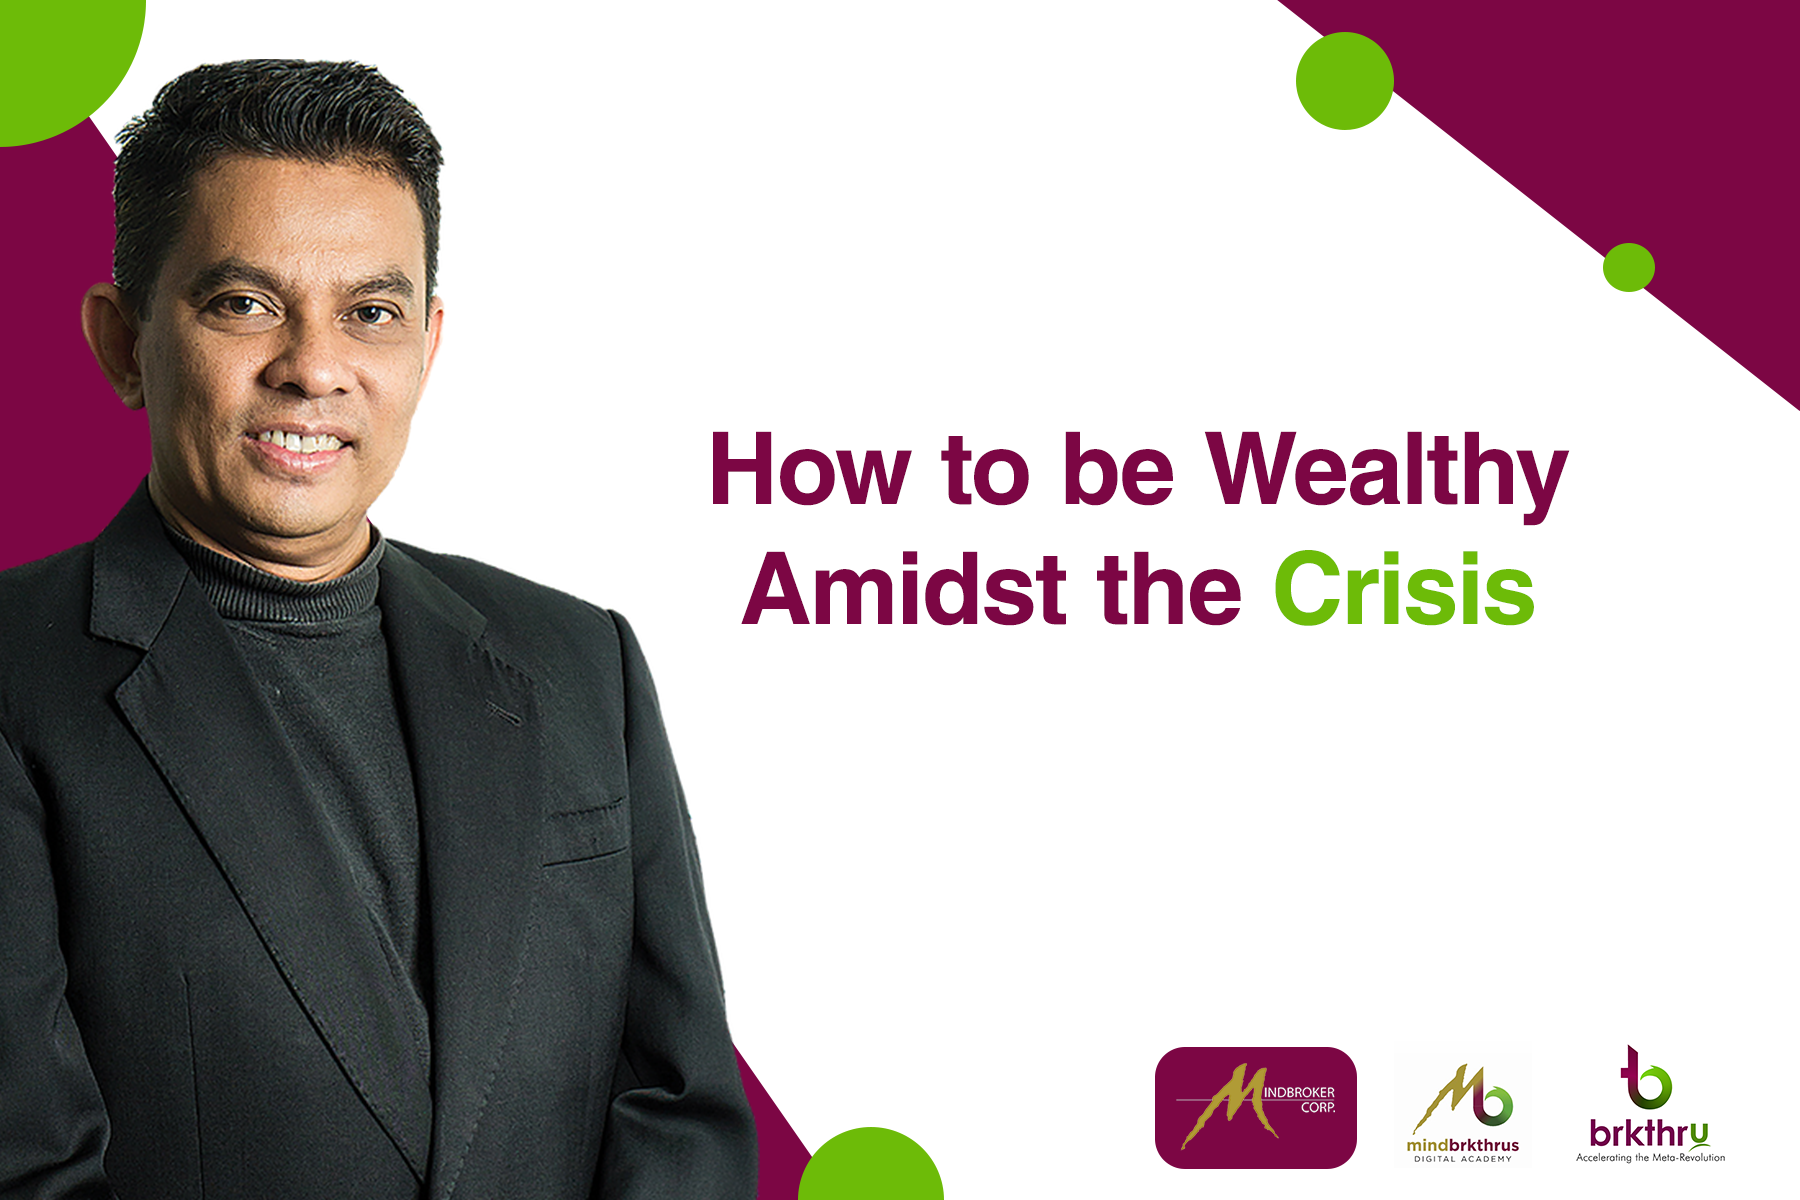 How to be Wealthy Amidst the Crisis